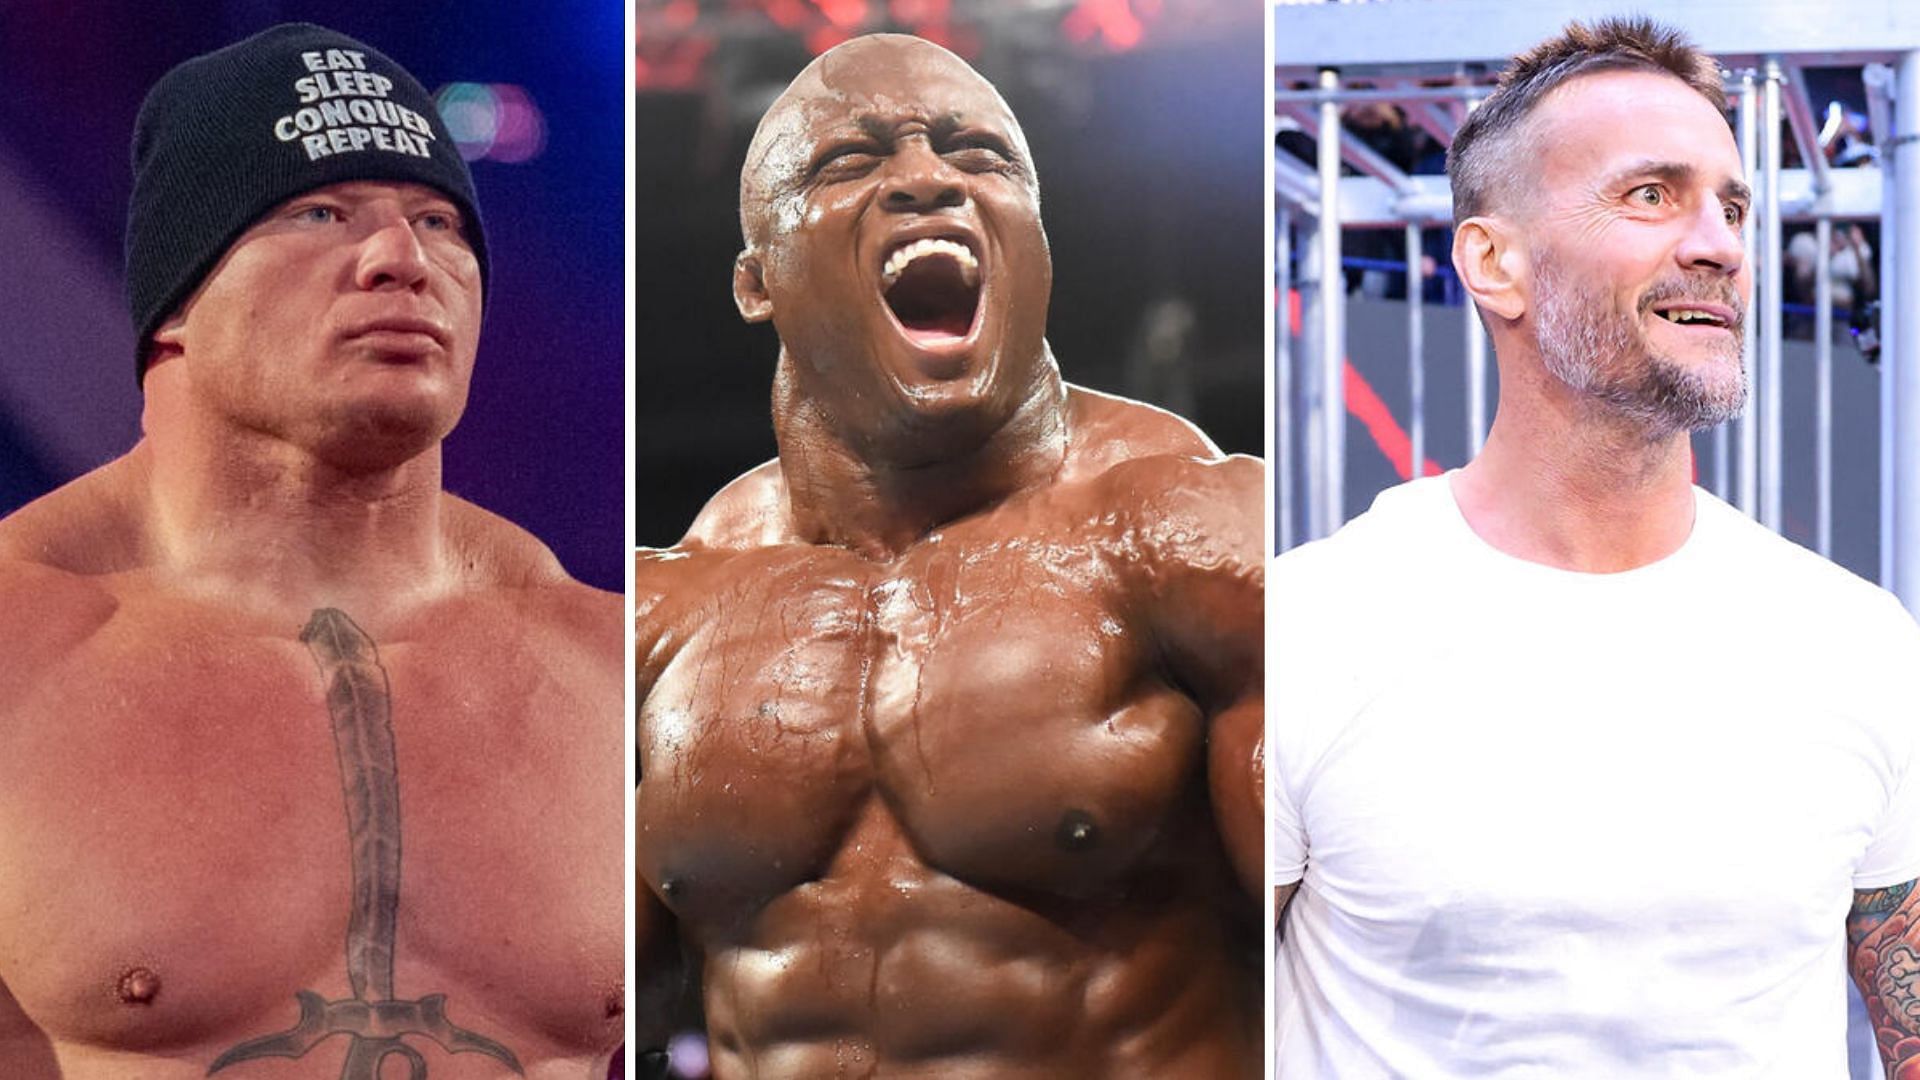 From left to right: Brock Lesnar, Bobby Lashley and CM Punk. (Photo Courtesy: WWE.com)